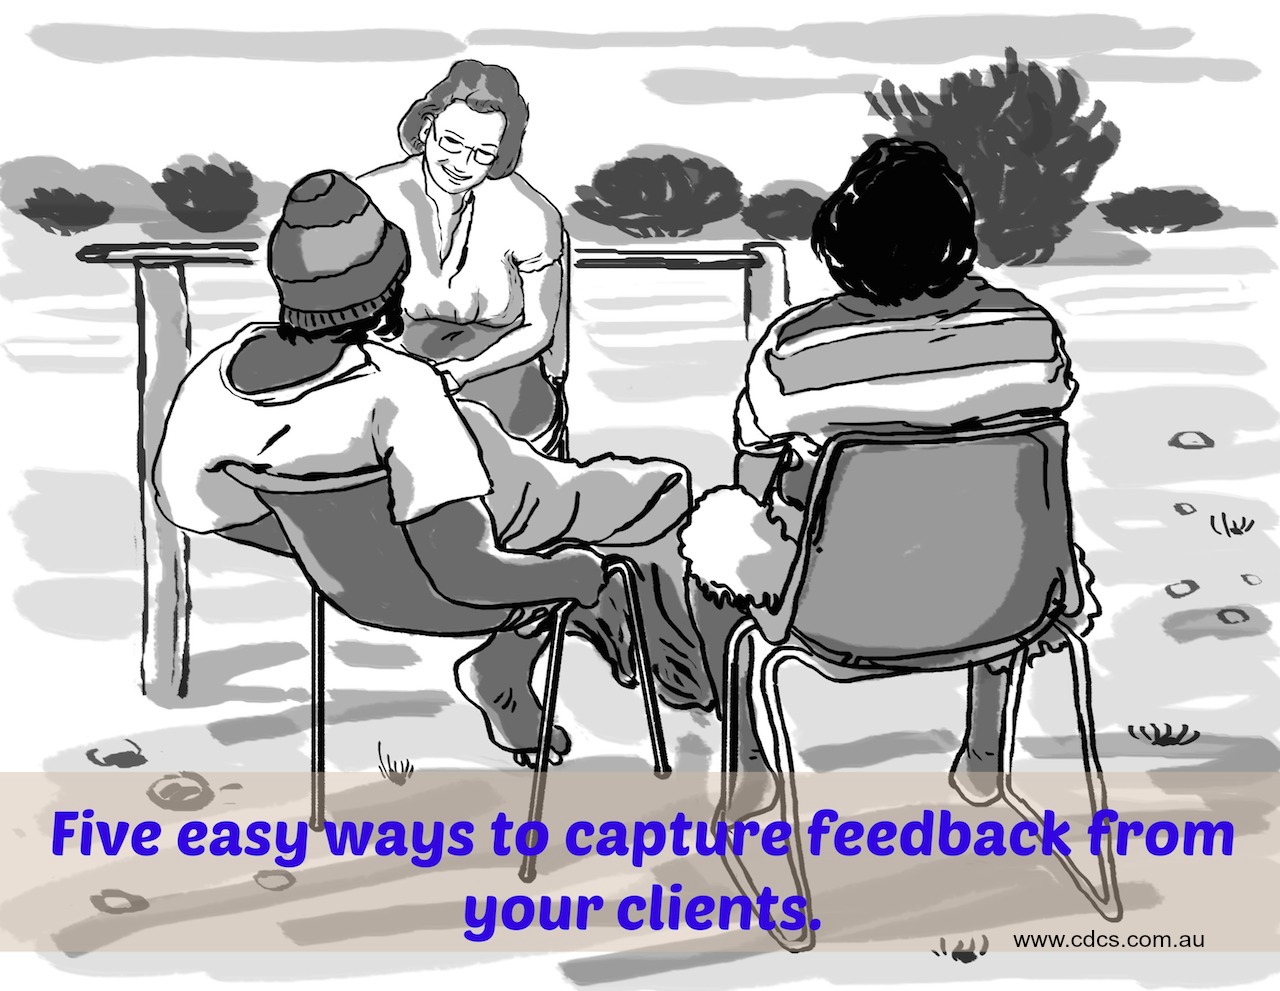 Five easy ways of gaining client feedback